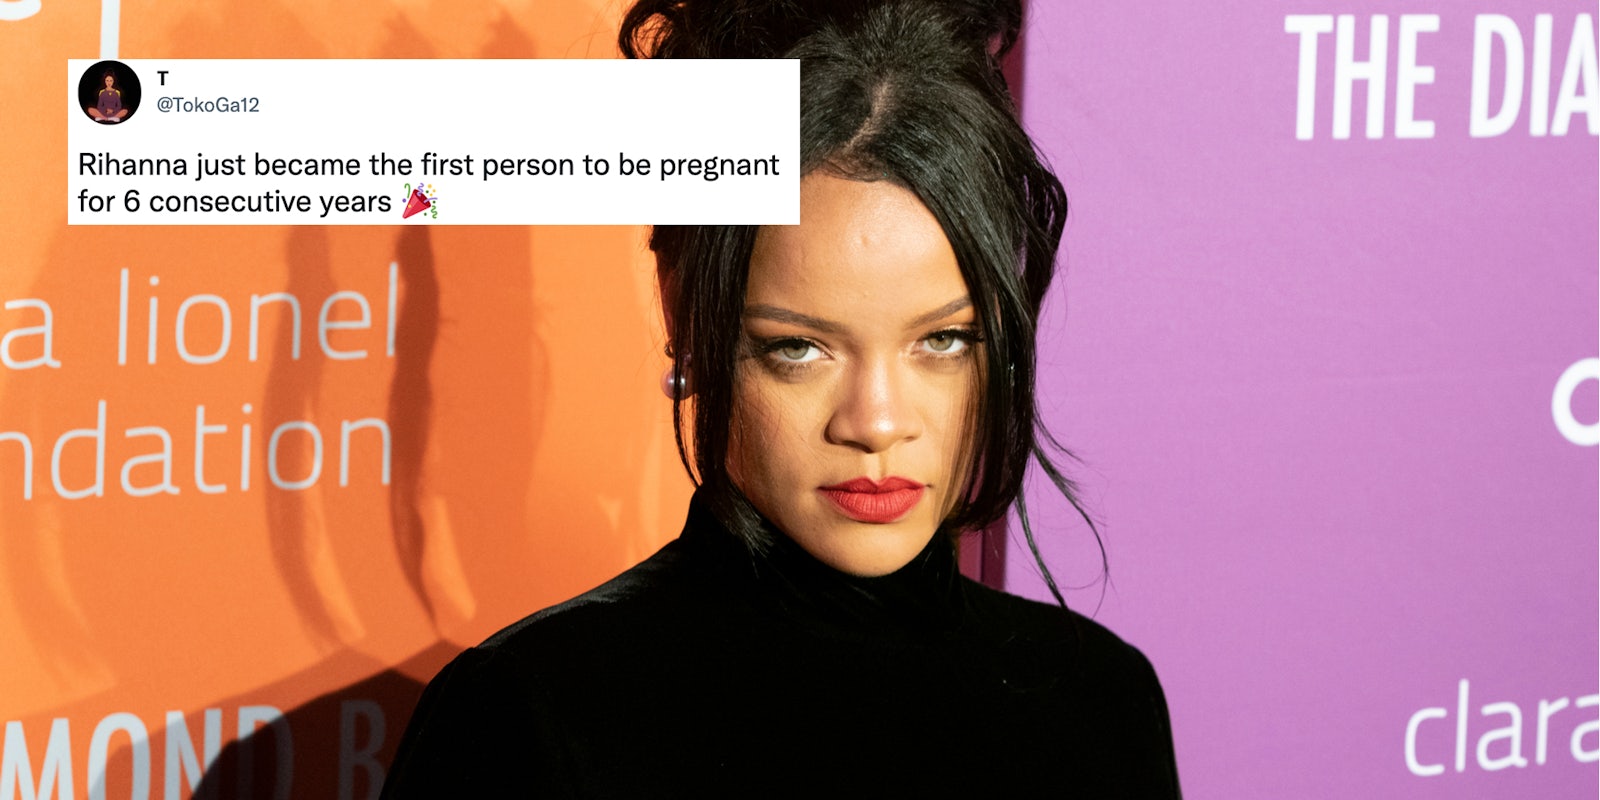 People are making memes after rumors spread that Rihanna is pregnant.